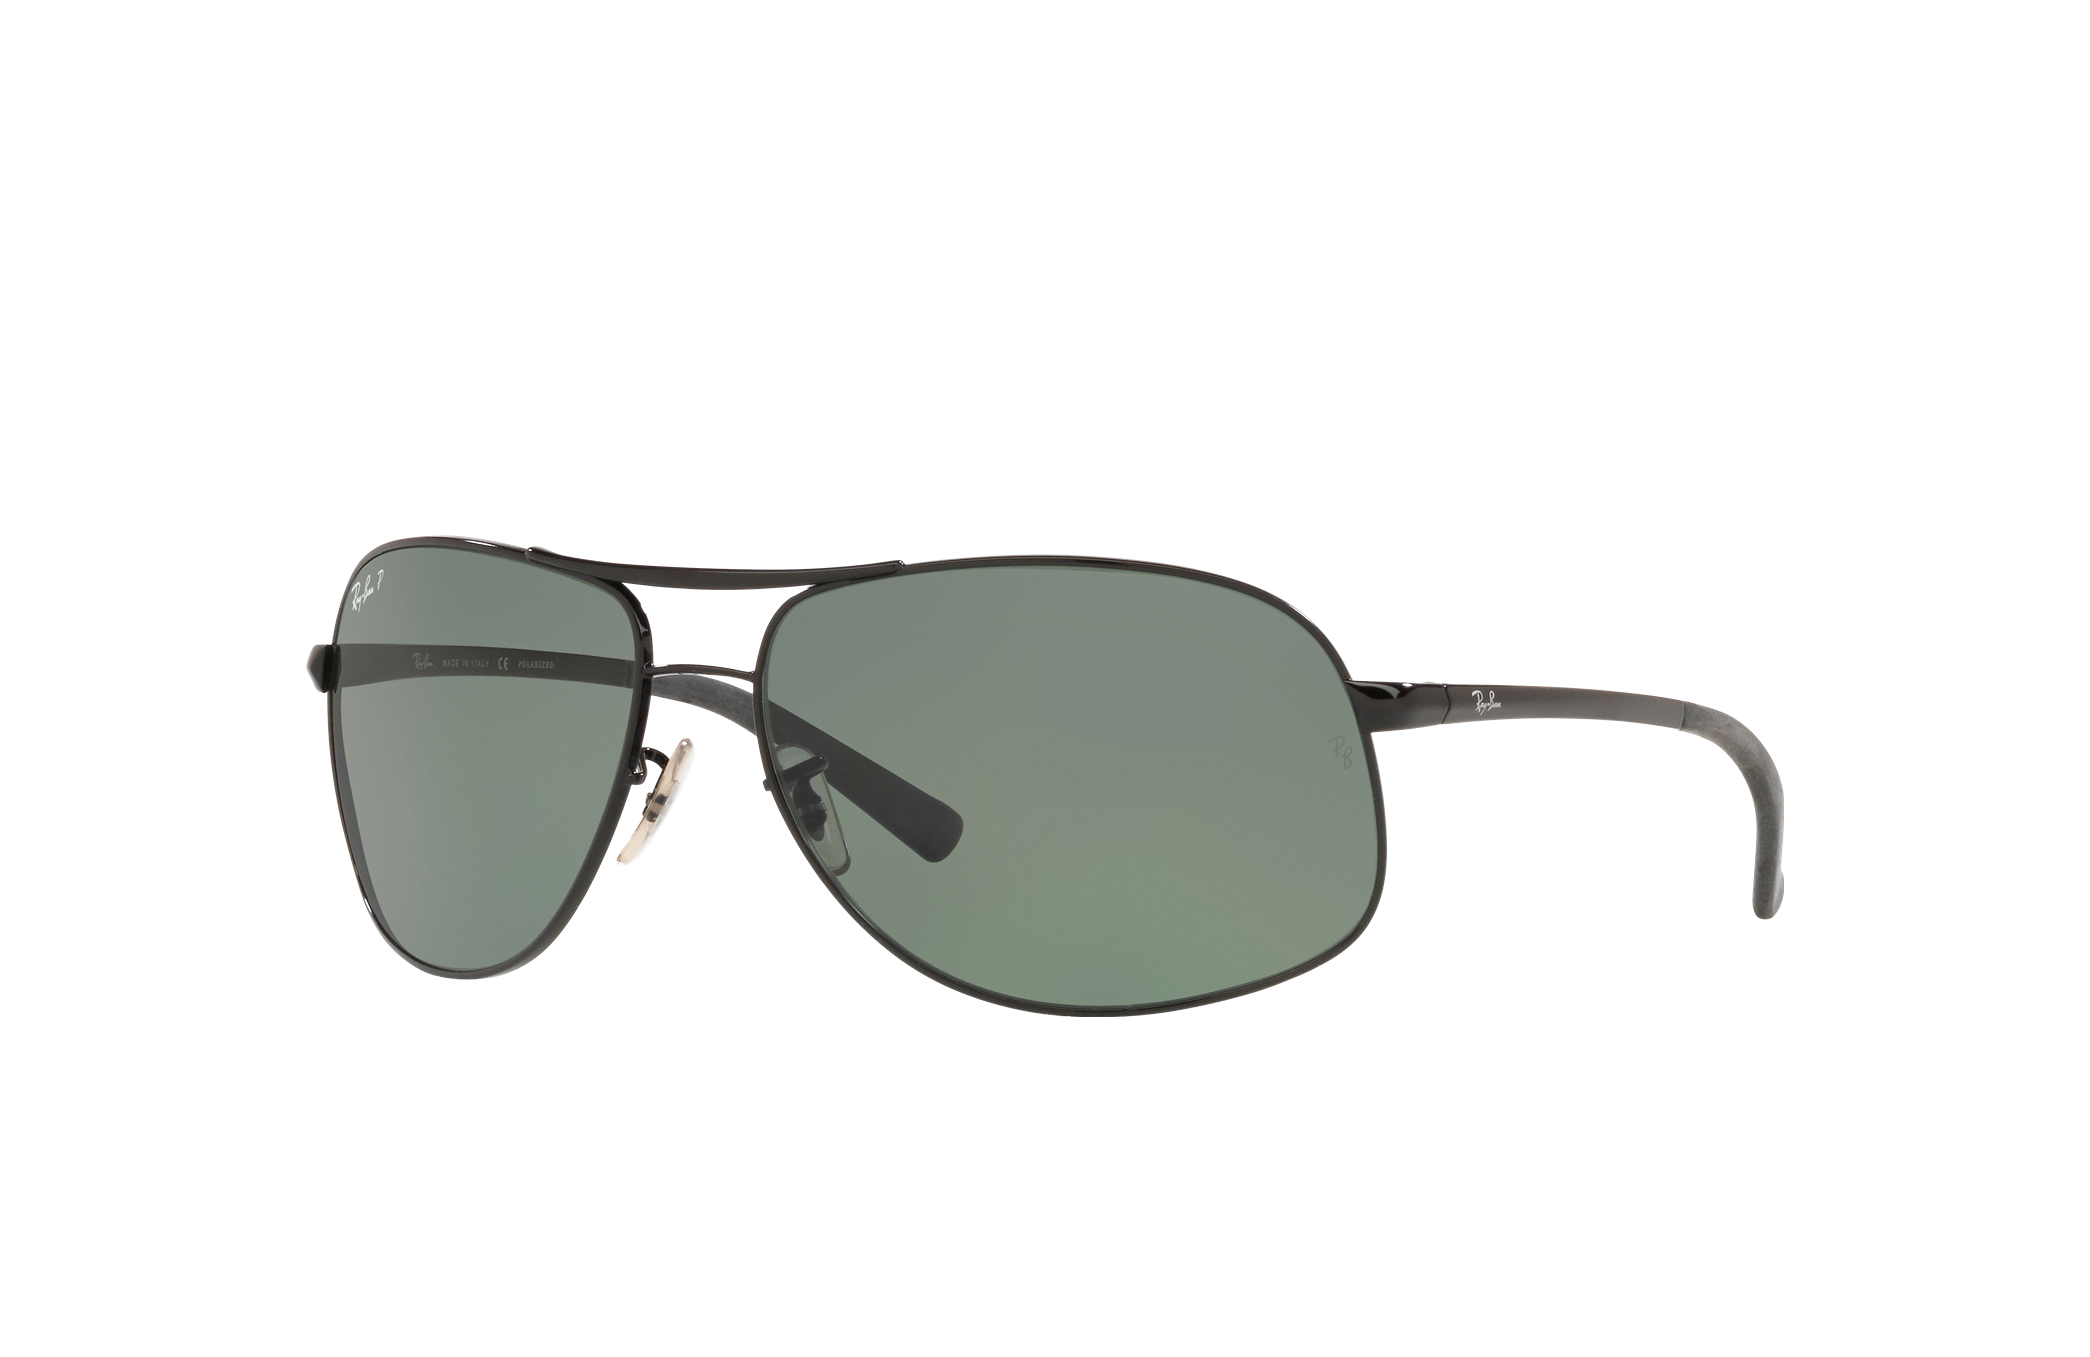 Rb3387 Sunglasses in Black and Green - RB3387 | Ray-Ban®